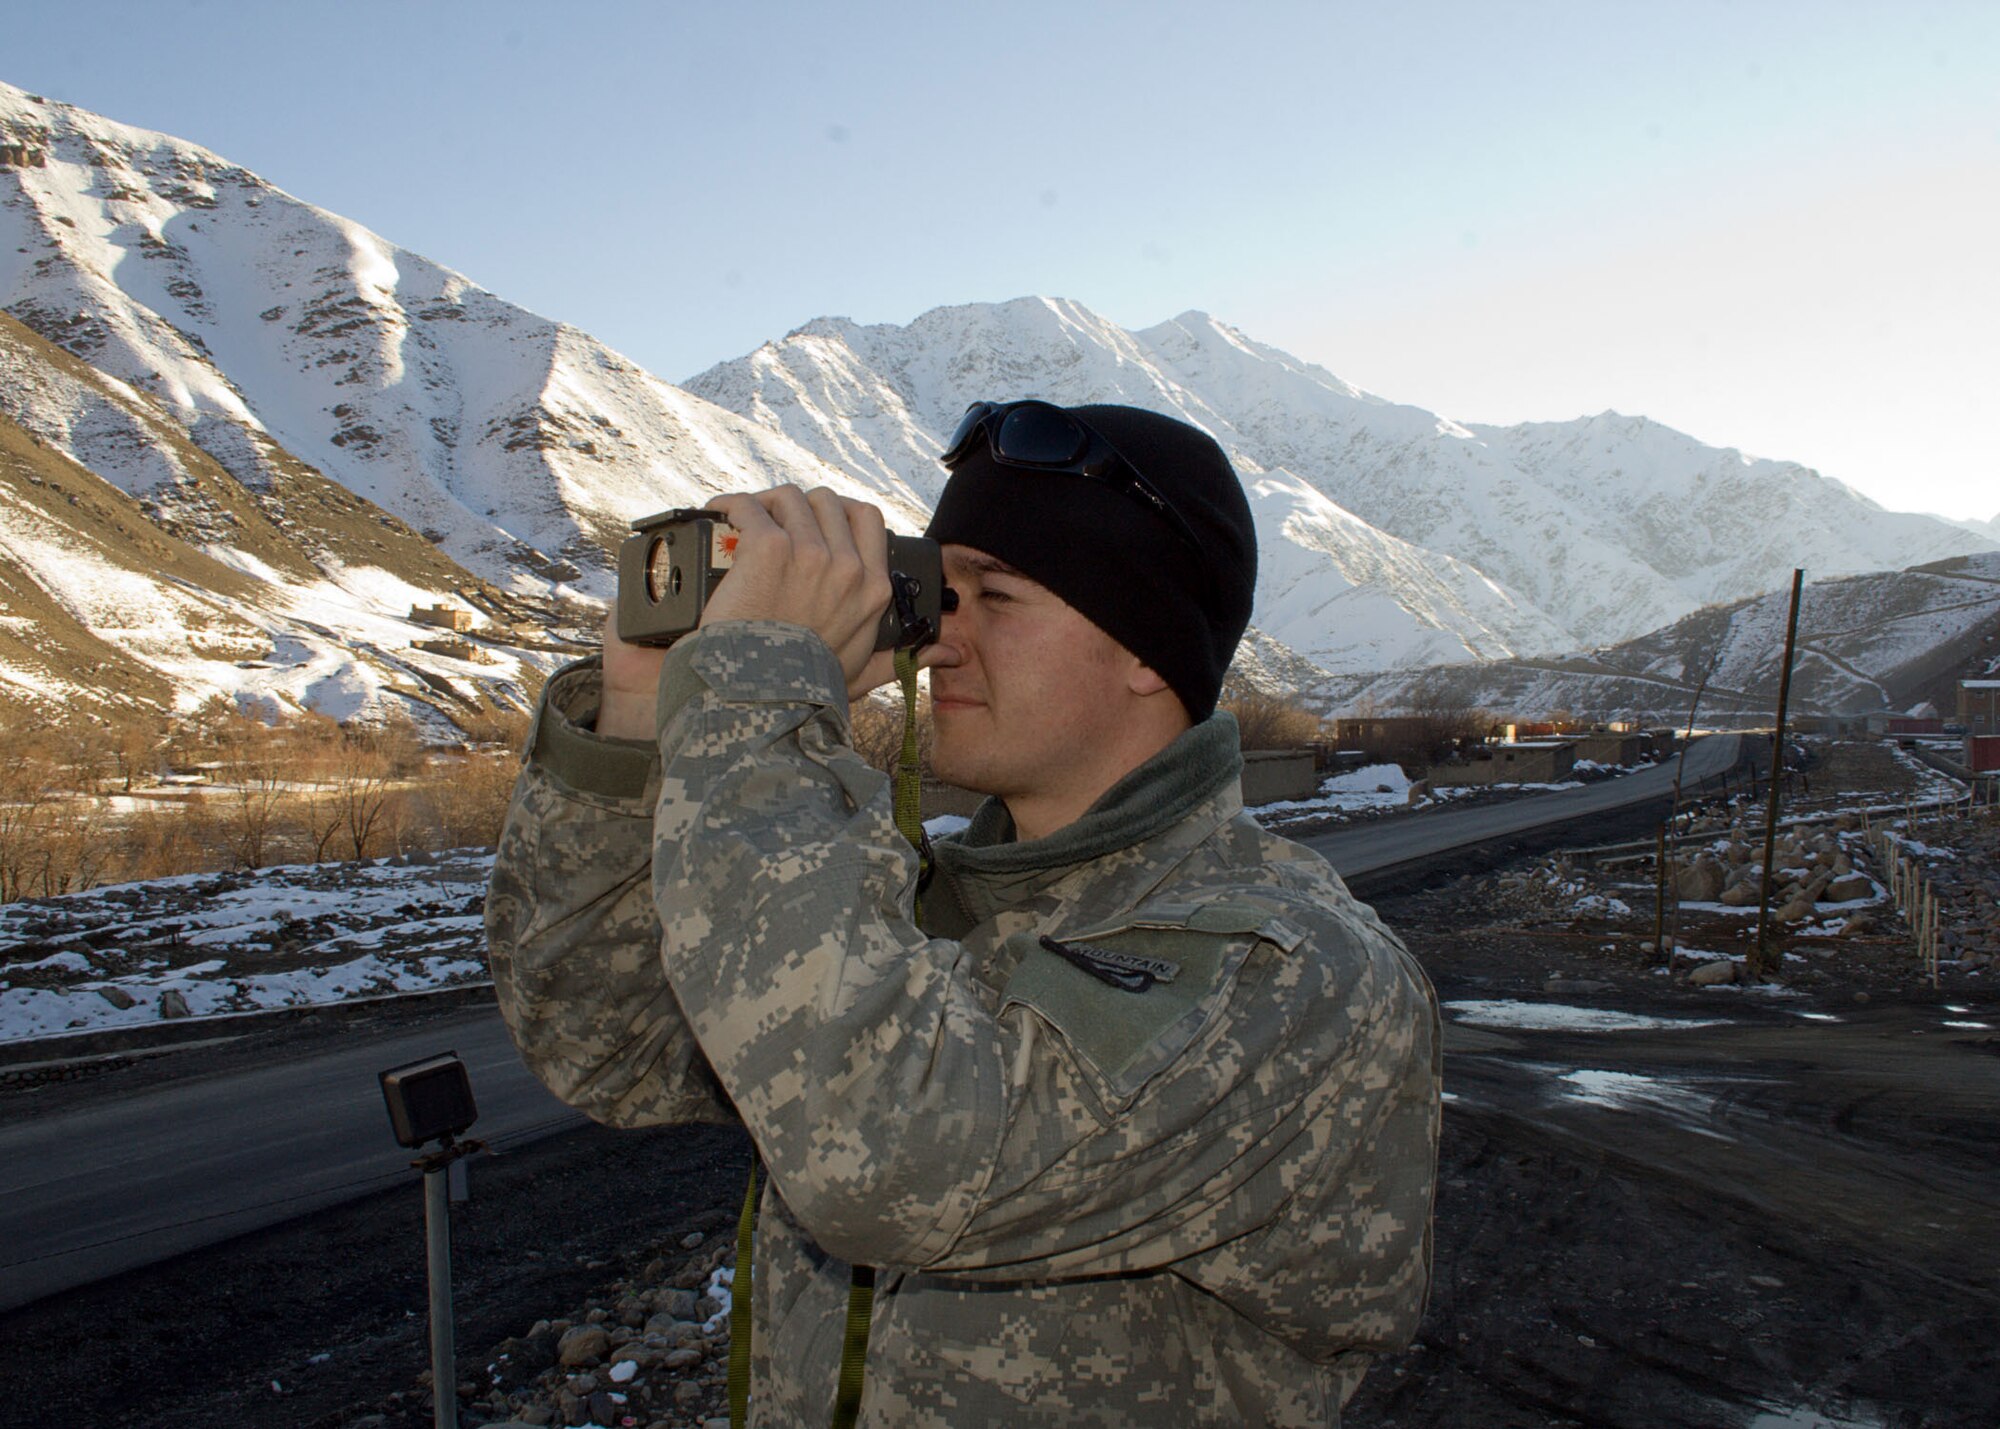 Senior Airman Nathan Fried uses a laser range finder to gather data for visibility charts Jan. 4 in the Panjshir Province in Afghanistan. He spent two days in early January training members of the Panjshir Provincial Reconstruction Team to take weather observations to help make aviation-support and convoy-operations decisions in the Panjshir Province. Airman Fried is assigned to the 20th Expeditionary Air Support and Operations Squadron at Bagram Air Base, Afghanistan. (Courtesy photo/Oref Spanta)
